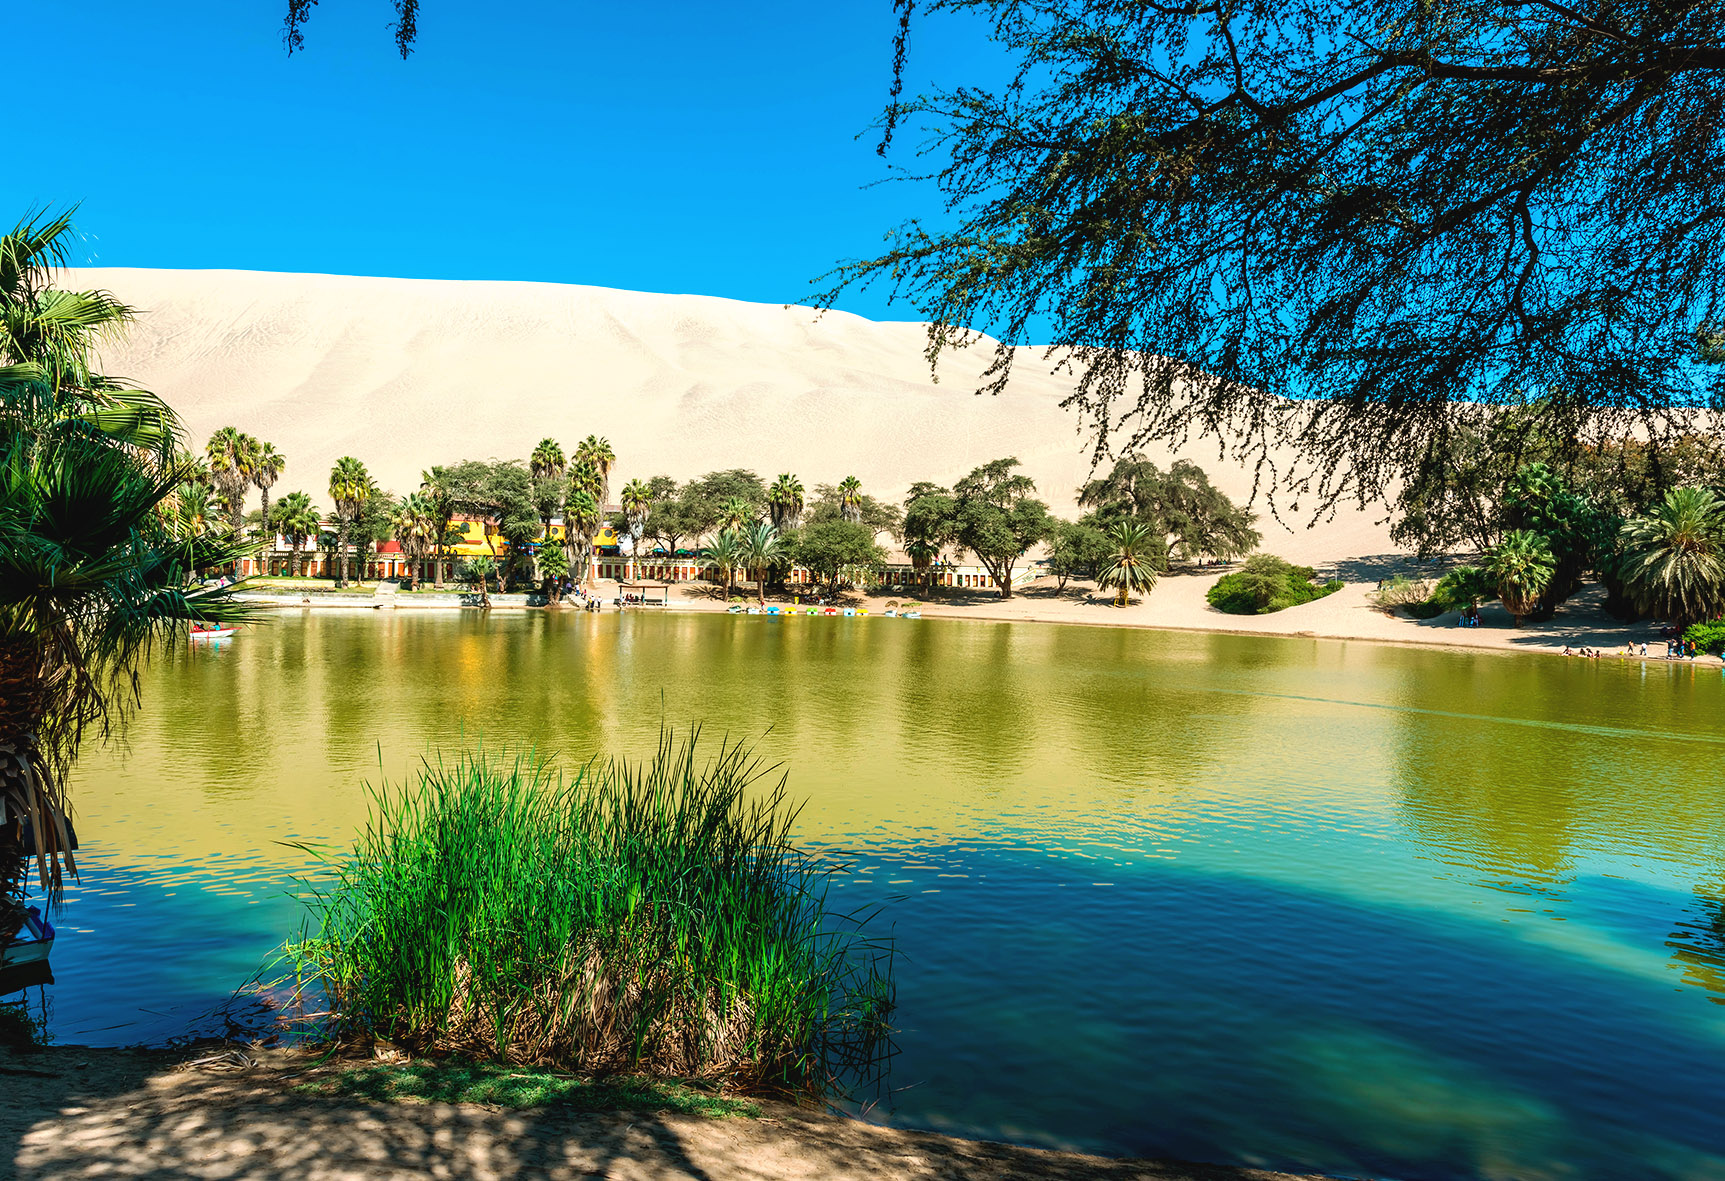 Discover the Huacachina Oasis-Natural Oasis in Peru